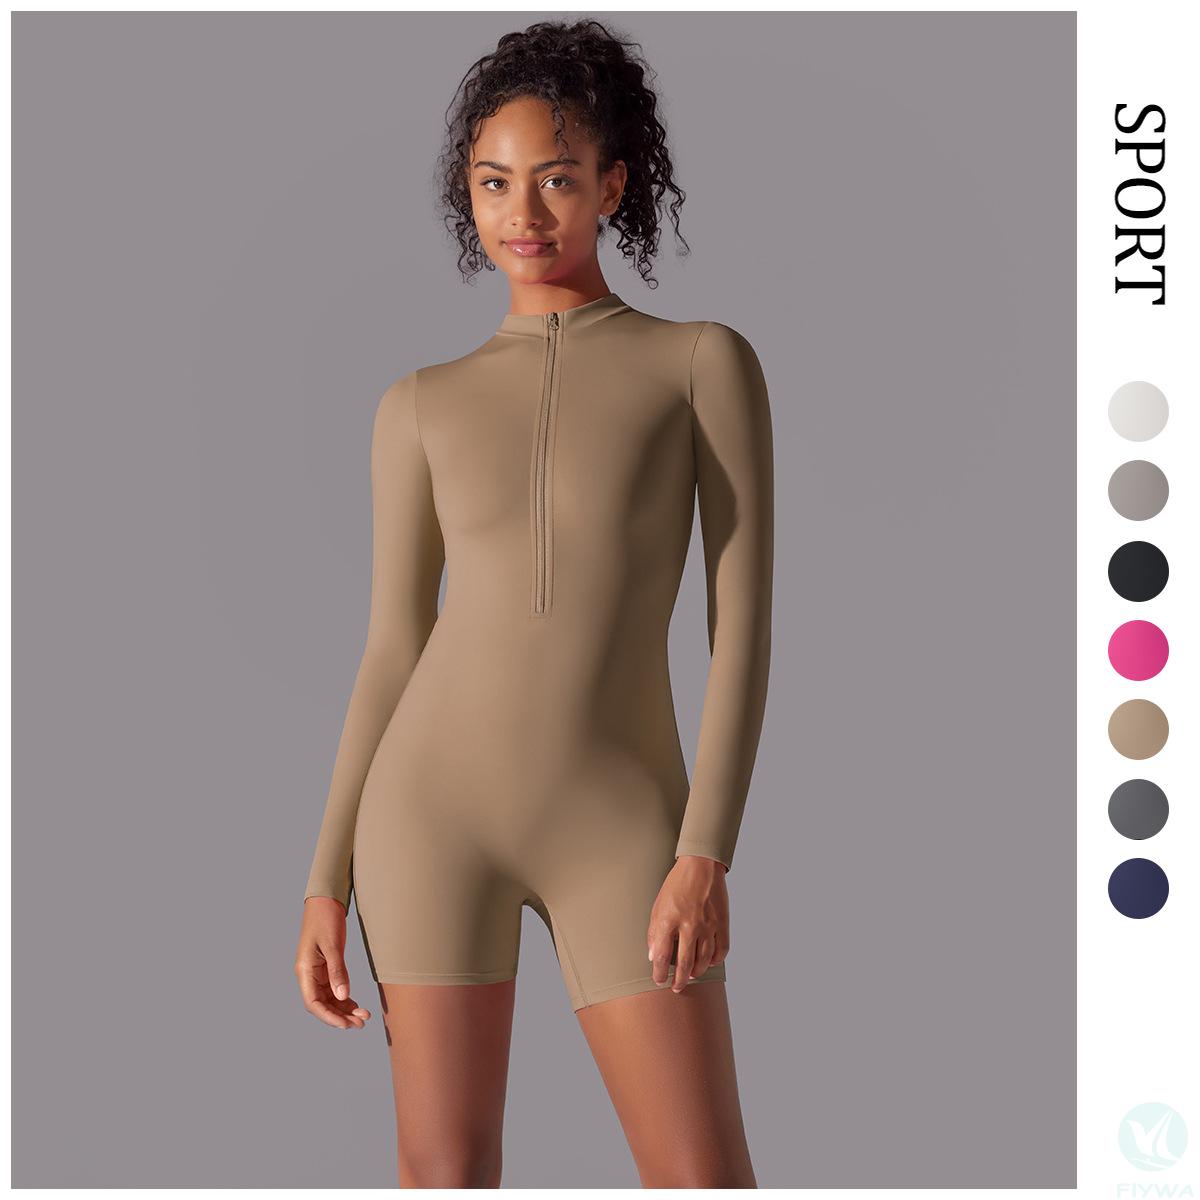 Open collar zipper long-sleeved jumpsuit fitness sports sexy tight jumpsuit brushed nude skin-friendly yoga wear FLY-LT-010